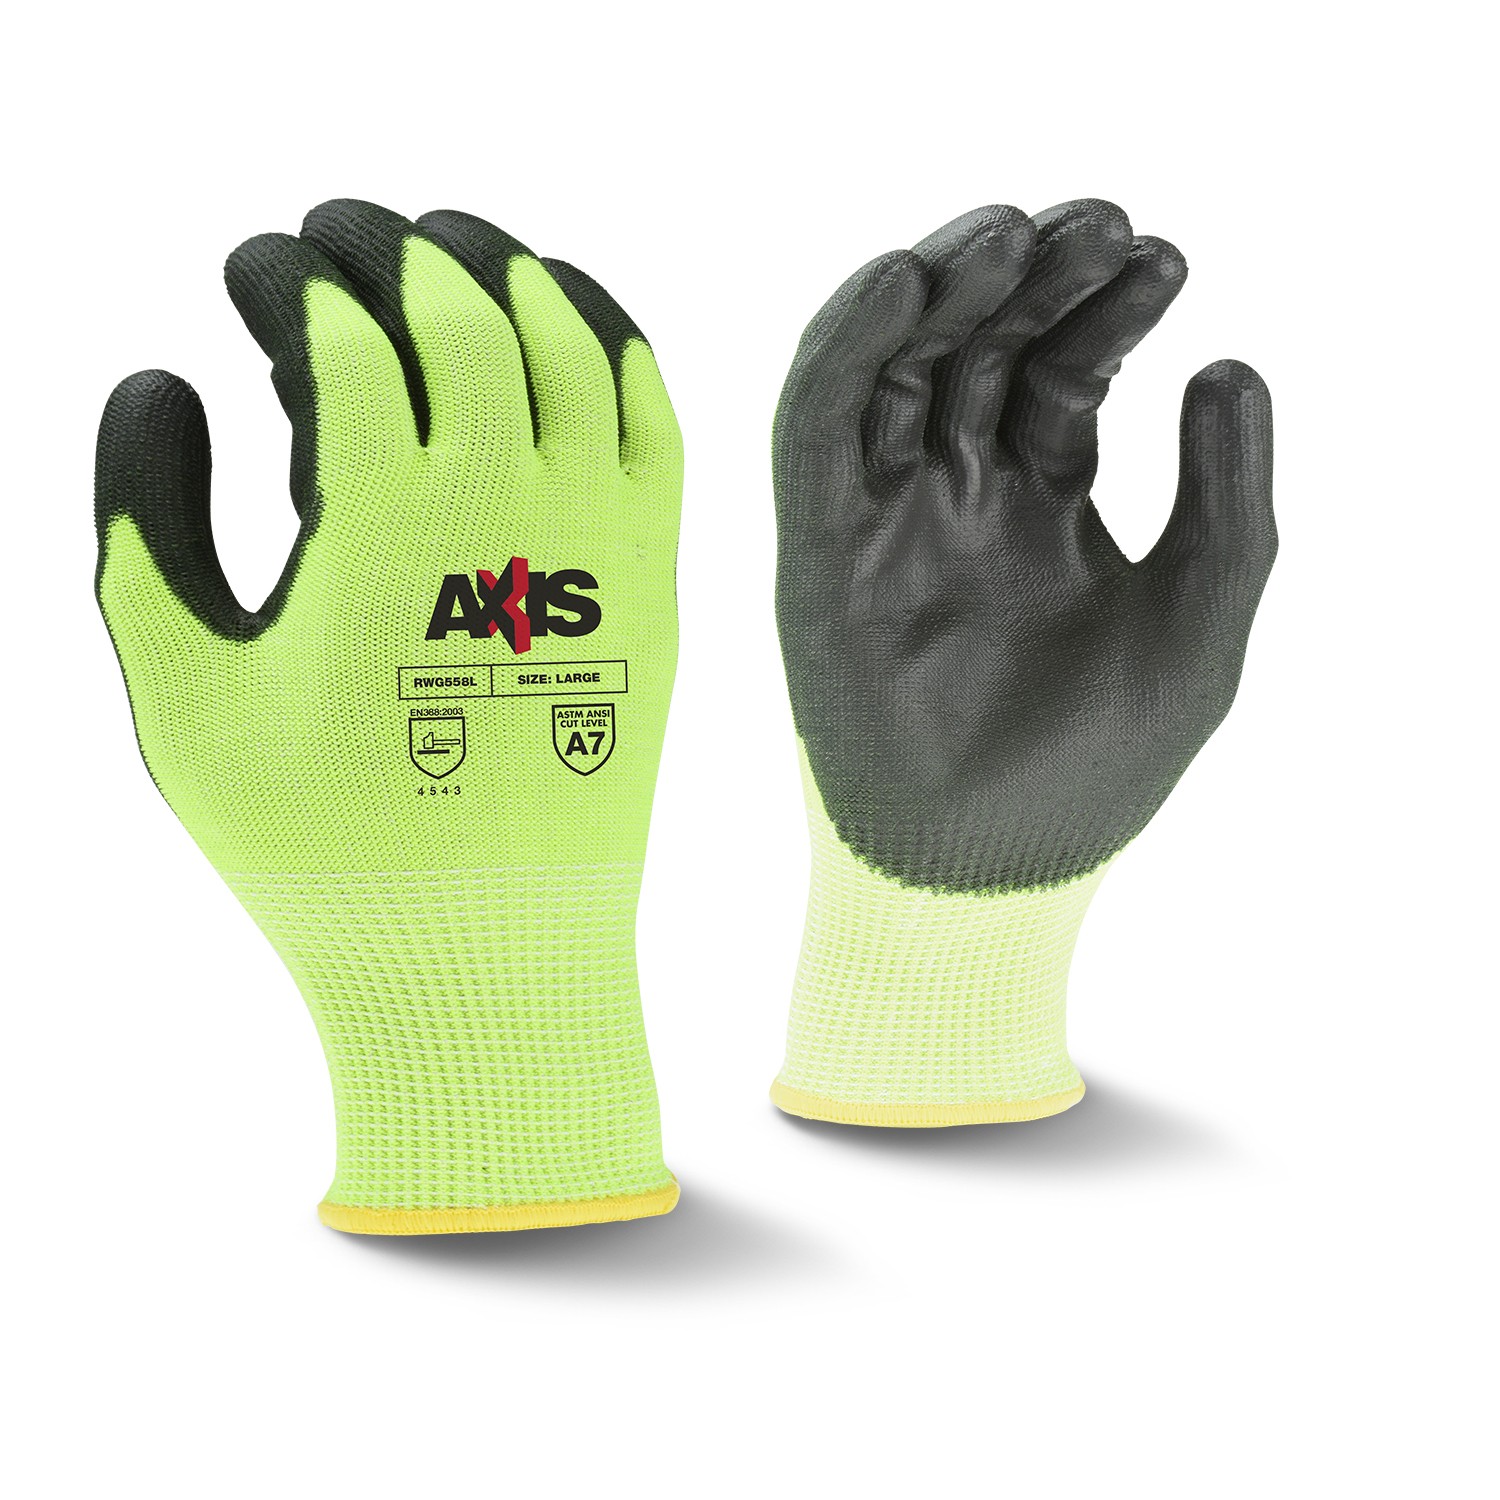 Axis™ Cut Protection Level A7 PU Coated Glove (#RWG558)